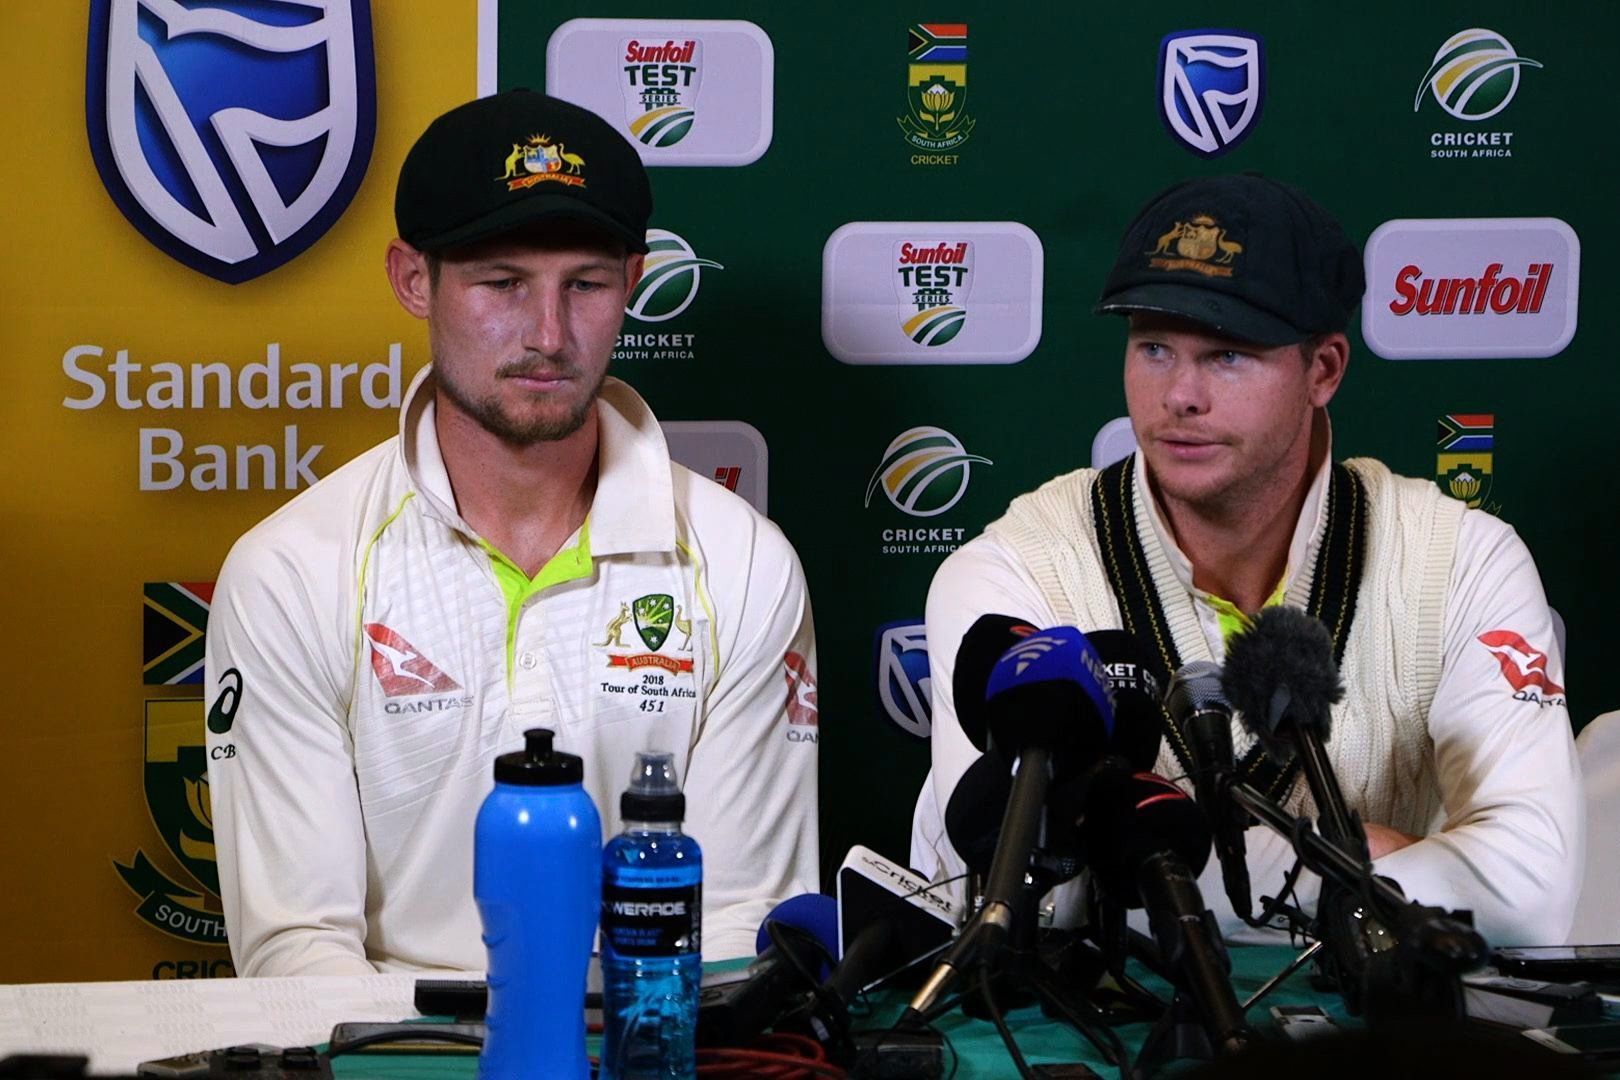 Cameron Bancroft and Steve Smith during a press conference in South Africa. (Credits: Twitter)